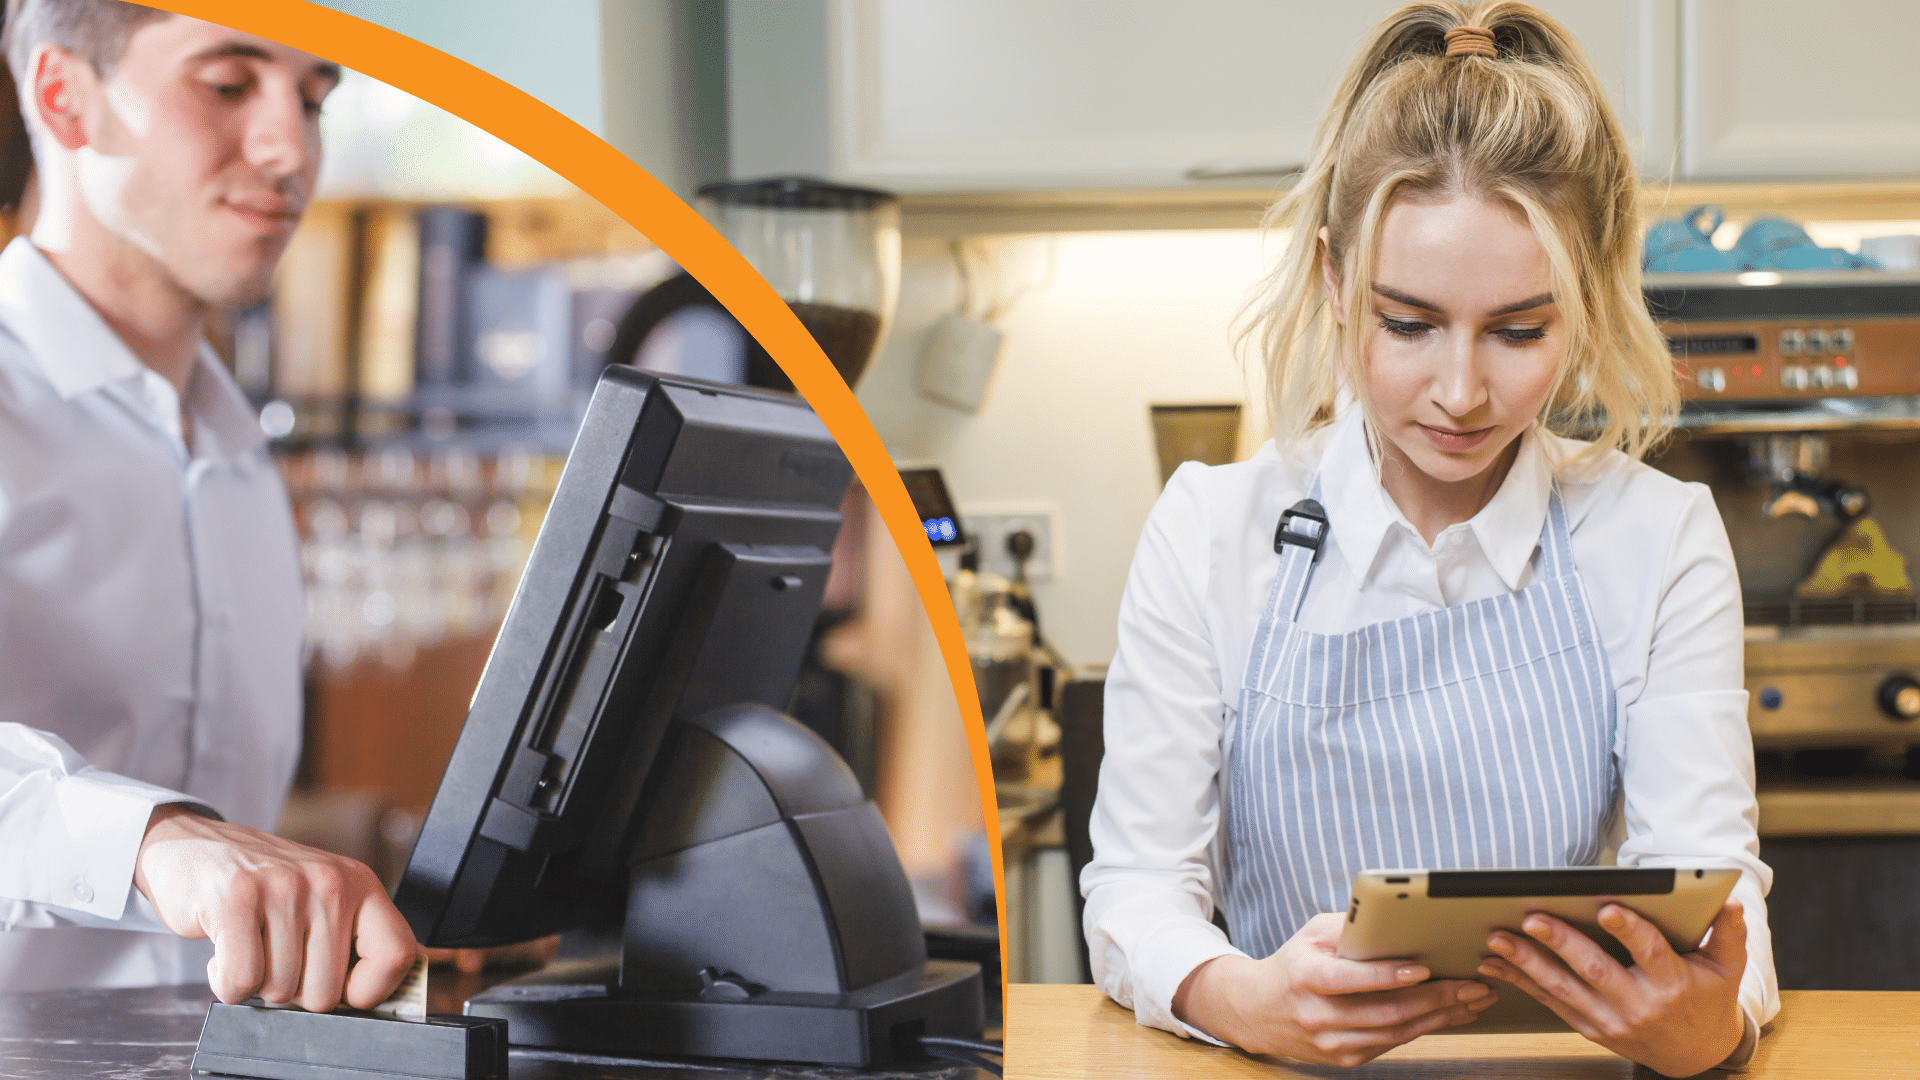 what is a pos system featured image showing two images, one a person using a desktop POS terminal and the other a person with an apron using a tablet